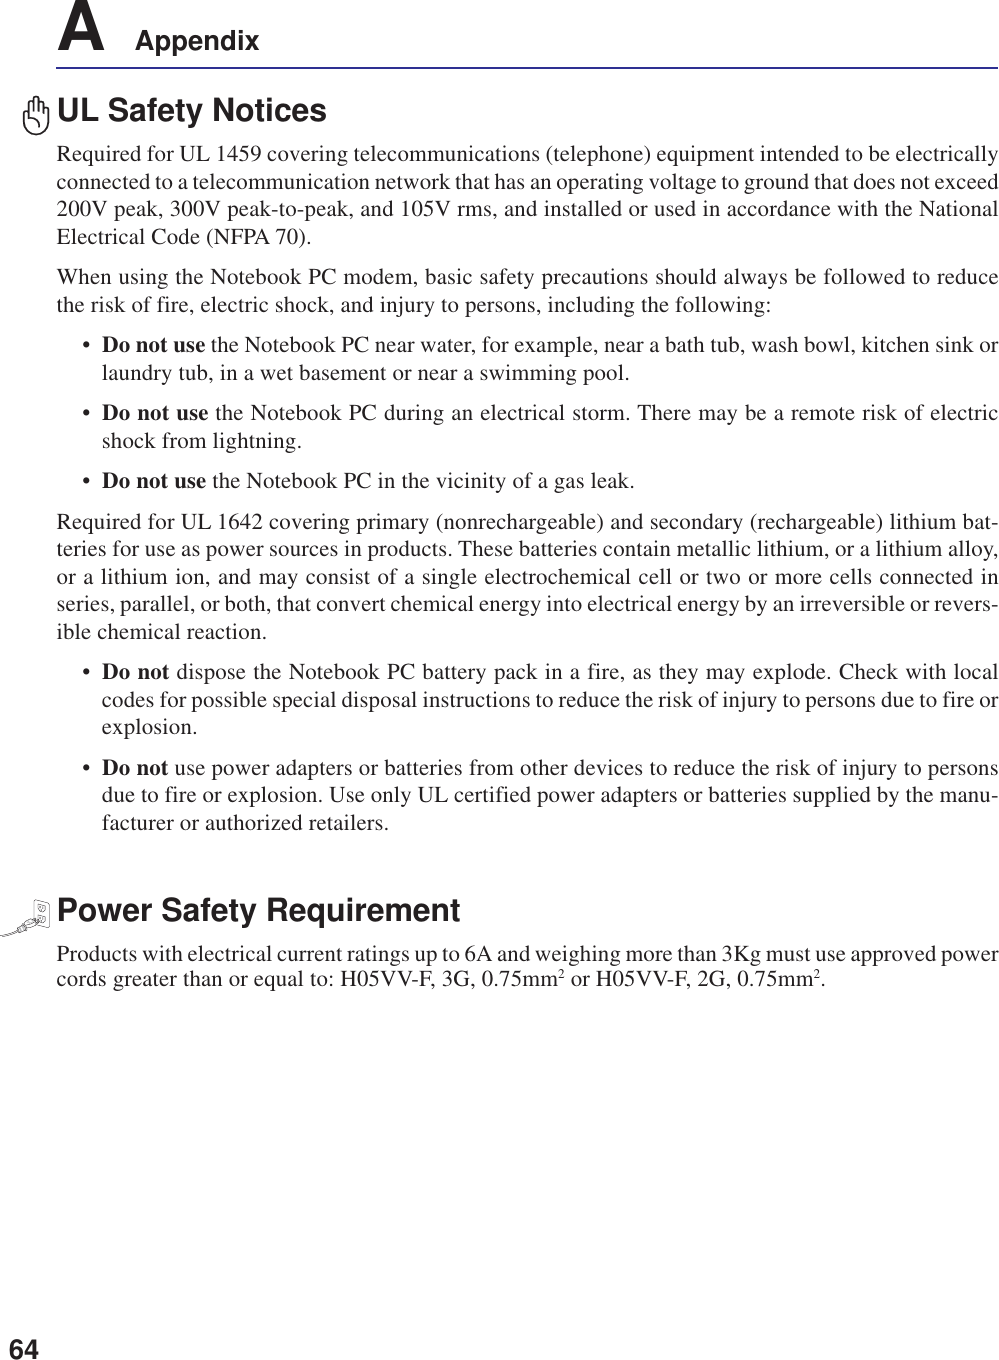 64A    AppendixUL Safety NoticesRequired for UL 1459 covering telecommunications (telephone) equipment intended to be electricallyconnected to a telecommunication network that has an operating voltage to ground that does not exceed200V peak, 300V peak-to-peak, and 105V rms, and installed or used in accordance with the NationalElectrical Code (NFPA 70).When using the Notebook PC modem, basic safety precautions should always be followed to reducethe risk of fire, electric shock, and injury to persons, including the following:•Do not use the Notebook PC near water, for example, near a bath tub, wash bowl, kitchen sink orlaundry tub, in a wet basement or near a swimming pool.•Do not use the Notebook PC during an electrical storm. There may be a remote risk of electricshock from lightning.•Do not use the Notebook PC in the vicinity of a gas leak.Required for UL 1642 covering primary (nonrechargeable) and secondary (rechargeable) lithium bat-teries for use as power sources in products. These batteries contain metallic lithium, or a lithium alloy,or a lithium ion, and may consist of a single electrochemical cell or two or more cells connected inseries, parallel, or both, that convert chemical energy into electrical energy by an irreversible or revers-ible chemical reaction.•Do not dispose the Notebook PC battery pack in a fire, as they may explode. Check with localcodes for possible special disposal instructions to reduce the risk of injury to persons due to fire orexplosion.•Do not use power adapters or batteries from other devices to reduce the risk of injury to personsdue to fire or explosion. Use only UL certified power adapters or batteries supplied by the manu-facturer or authorized retailers.Power Safety RequirementProducts with electrical current ratings up to 6A and weighing more than 3Kg must use approved powercords greater than or equal to: H05VV-F, 3G, 0.75mm2 or H05VV-F, 2G, 0.75mm2.